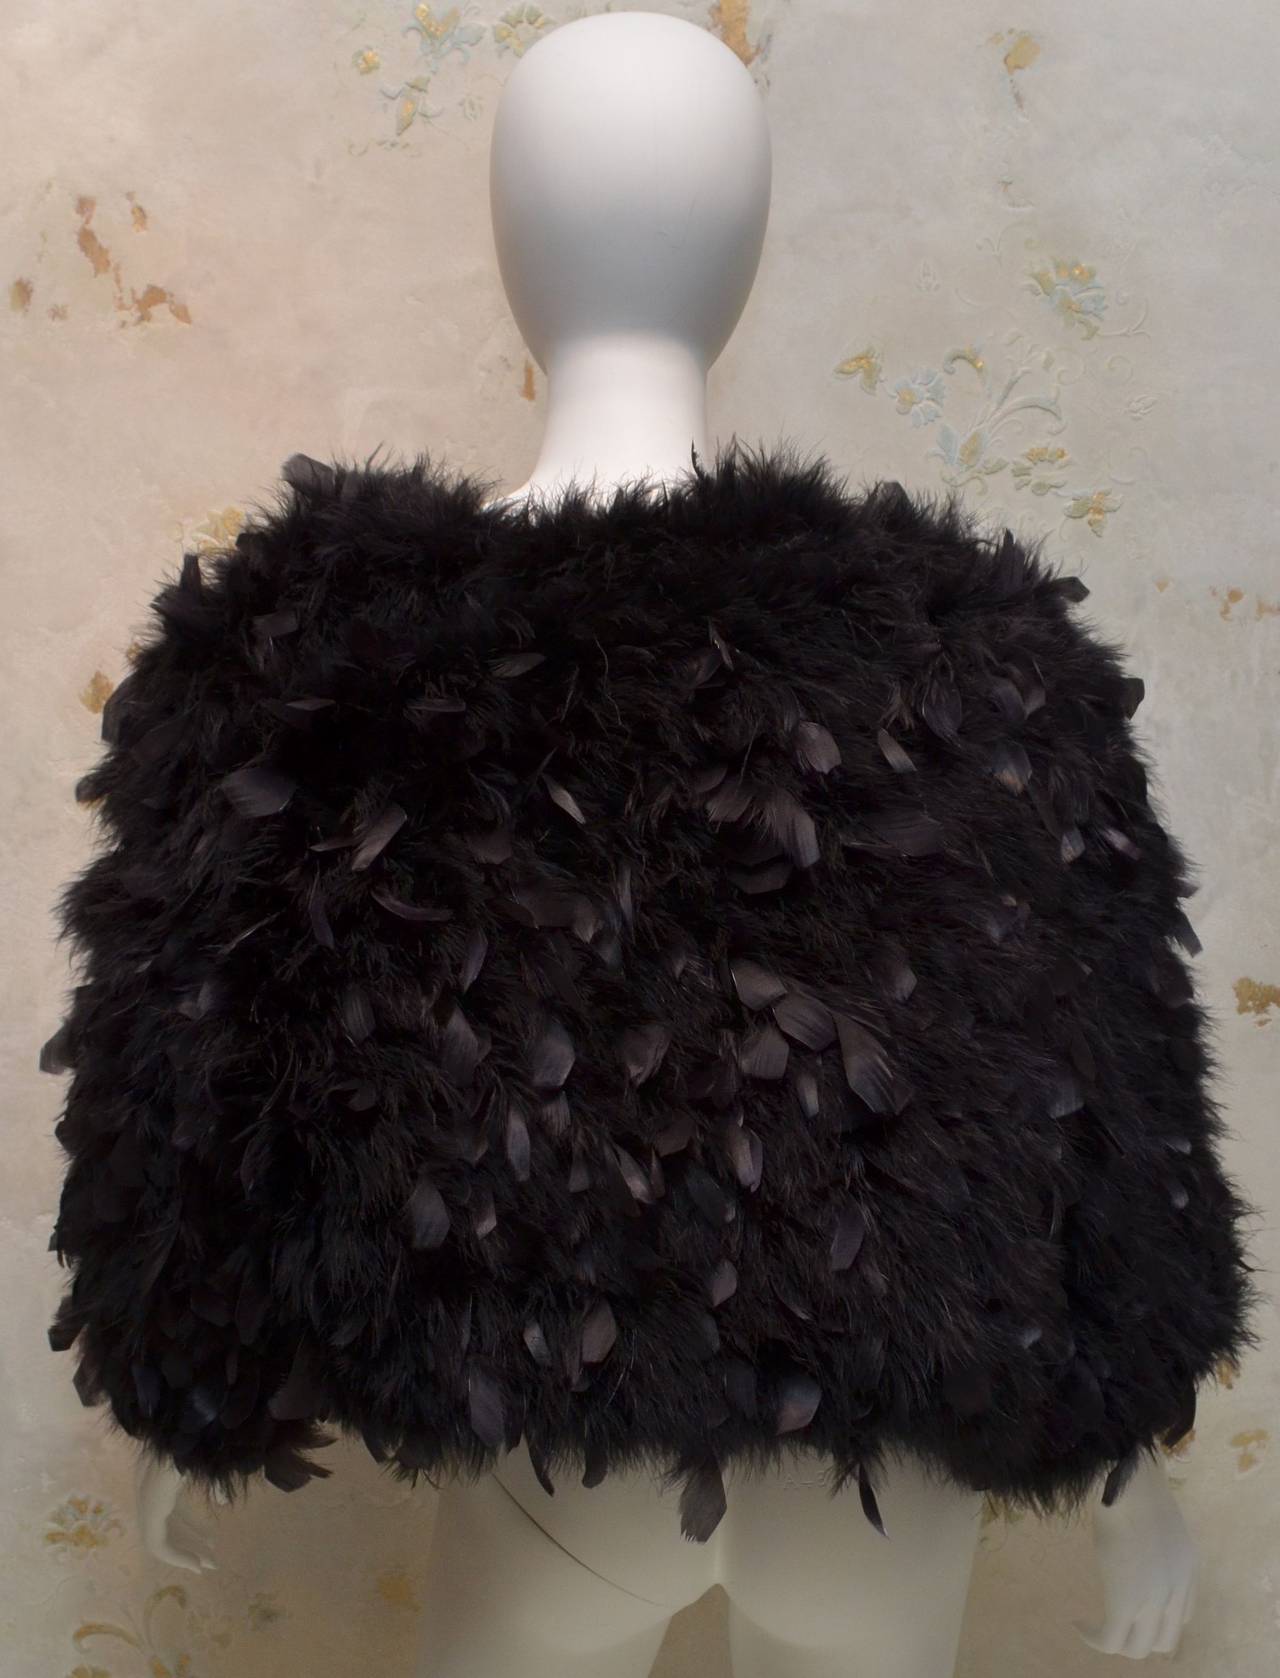 Turkey feather jacket is fully lined and made in Macao.

Measurements:
Bust - 48''
Sleeves - 23''
Length - 19''